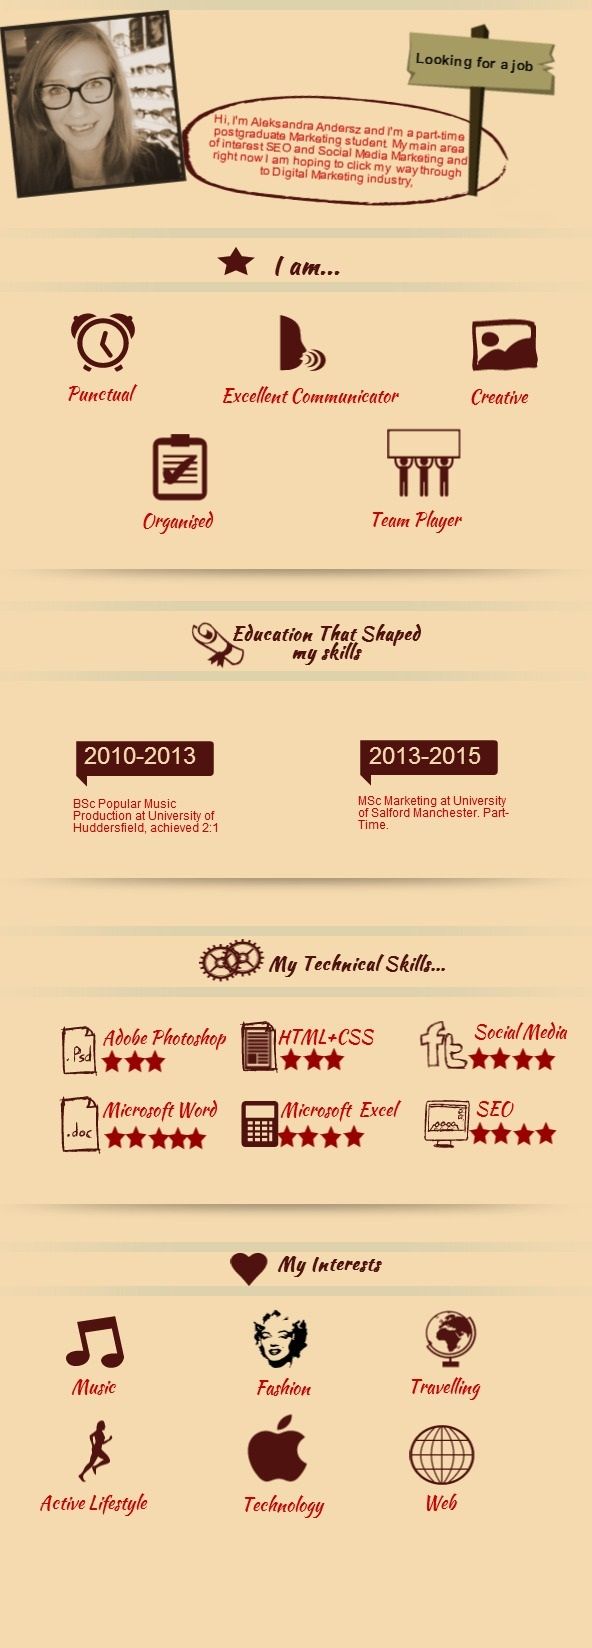 Crafting A Perfect About Me Page - #infographic / Digital Information World